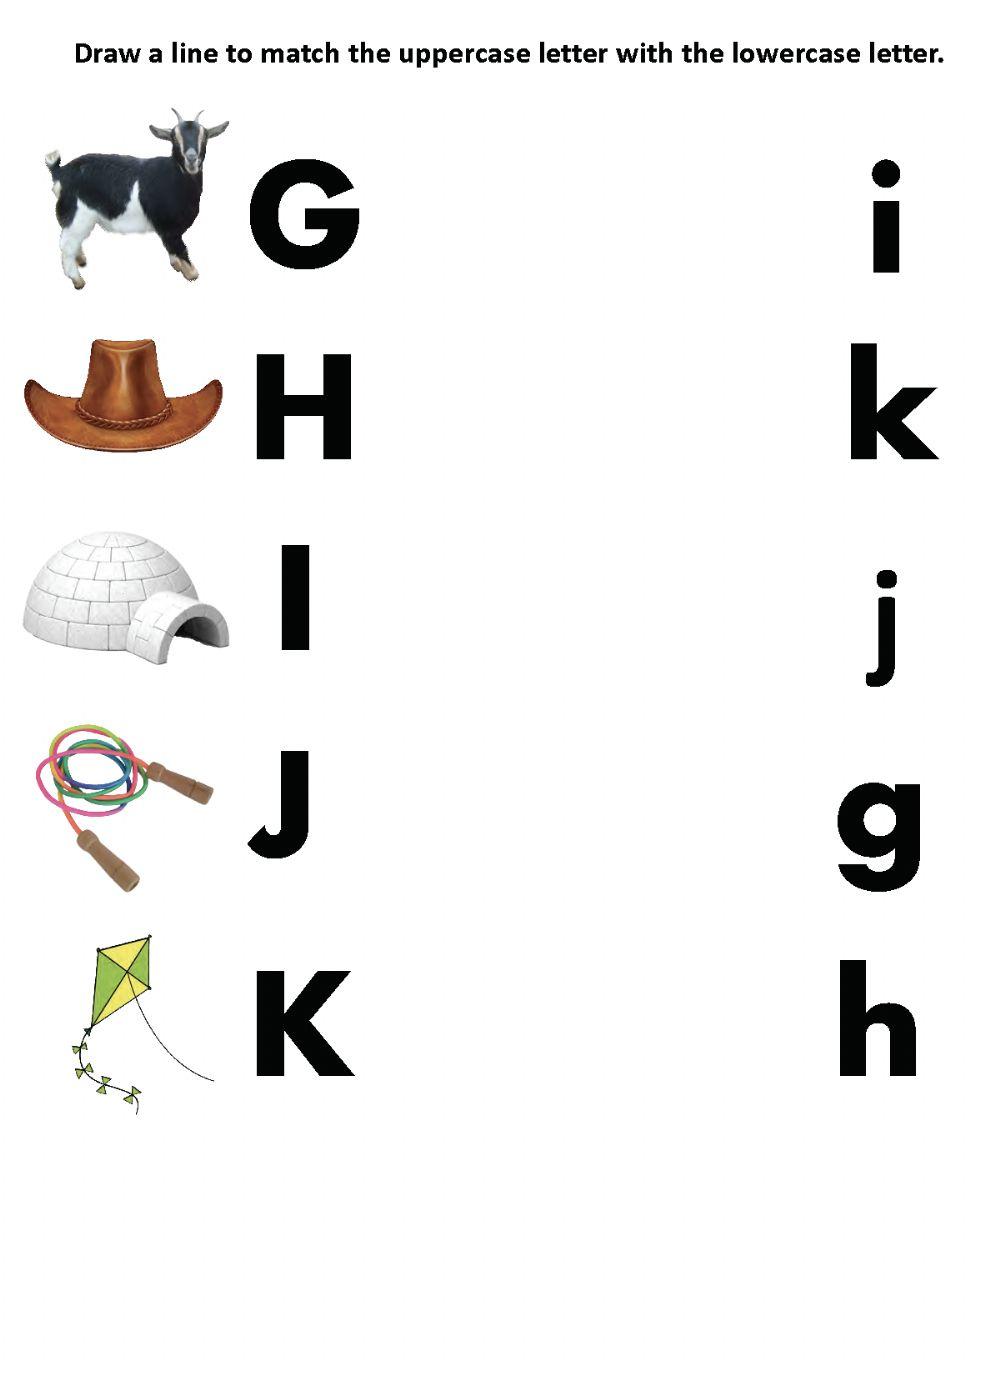 Match the letters G-K